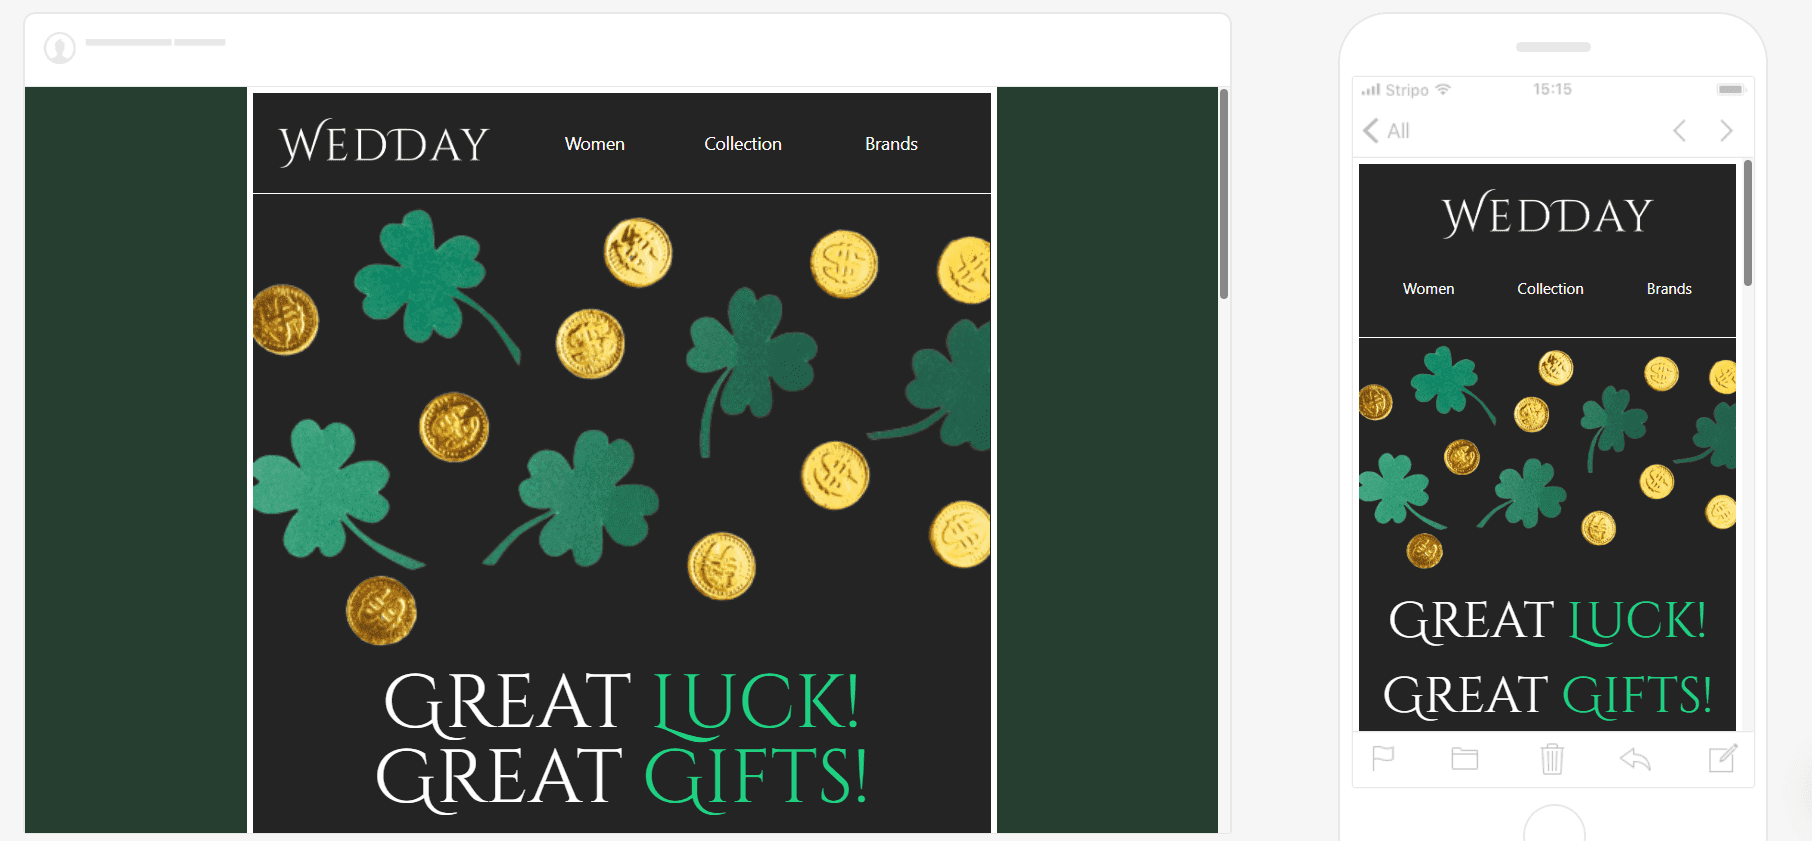 Responsive St. Patrick's Day Email Templates